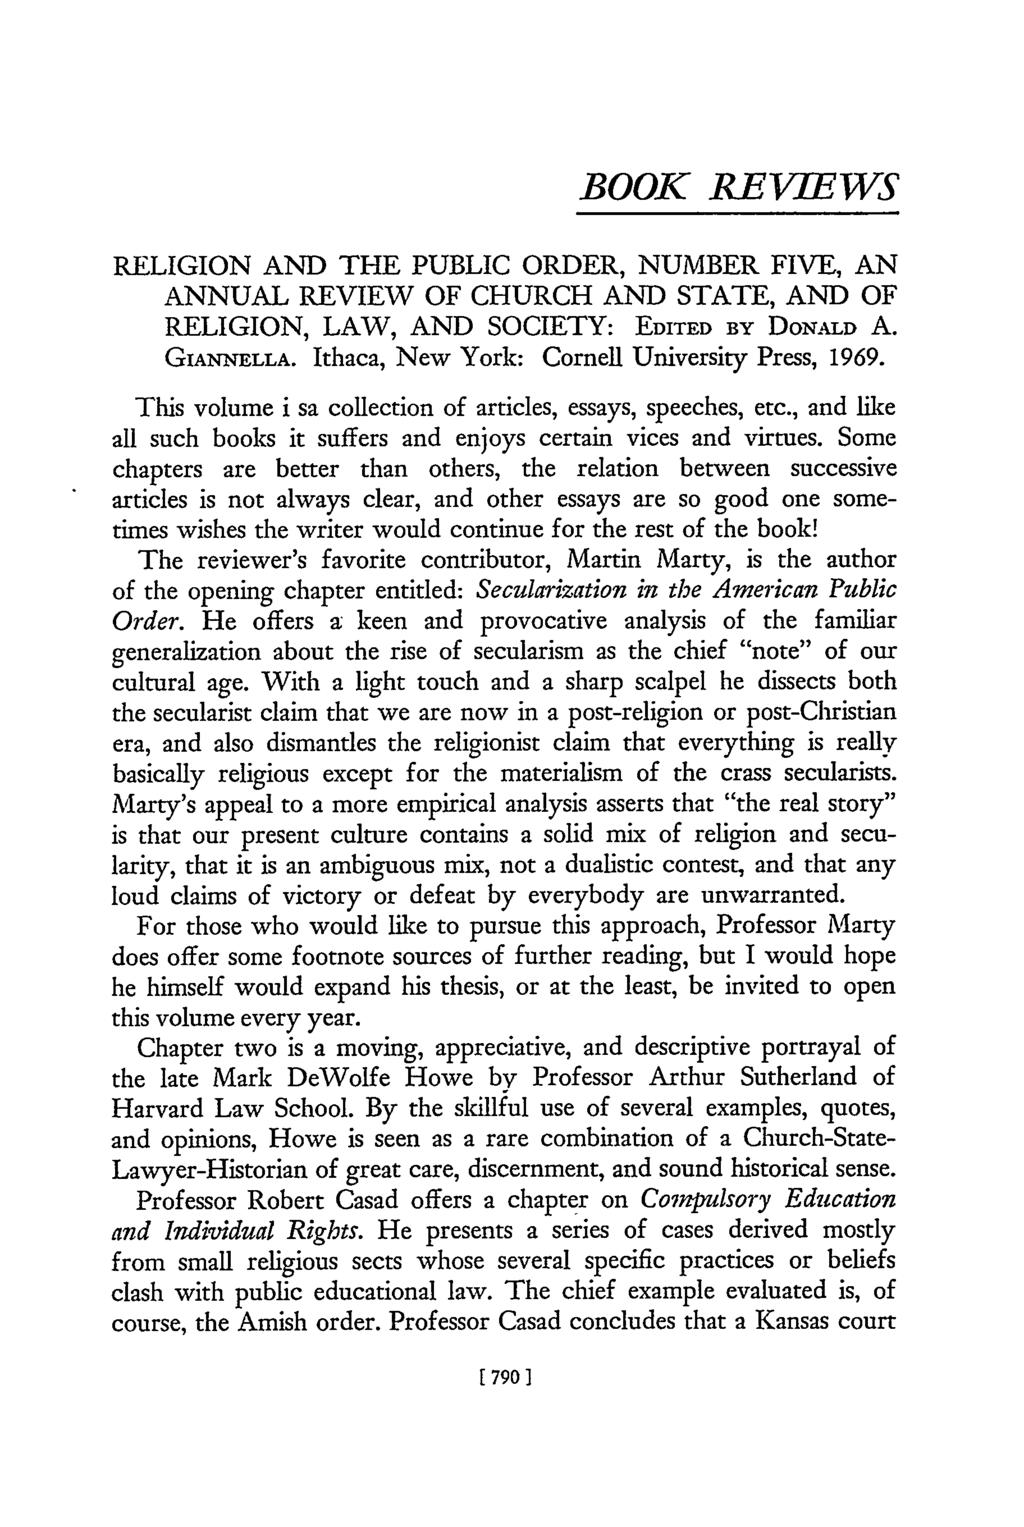 BOOK REVIEWS RELIGION AND THE PUBLIC ORDER, NUMBER FIVE, AN ANNUAL REVIEW OF CHURCH AND STATE, AND OF RELIGION, LAW, AND SOCIETY: EDITED BY DON A.LD A. GIANNELLA.